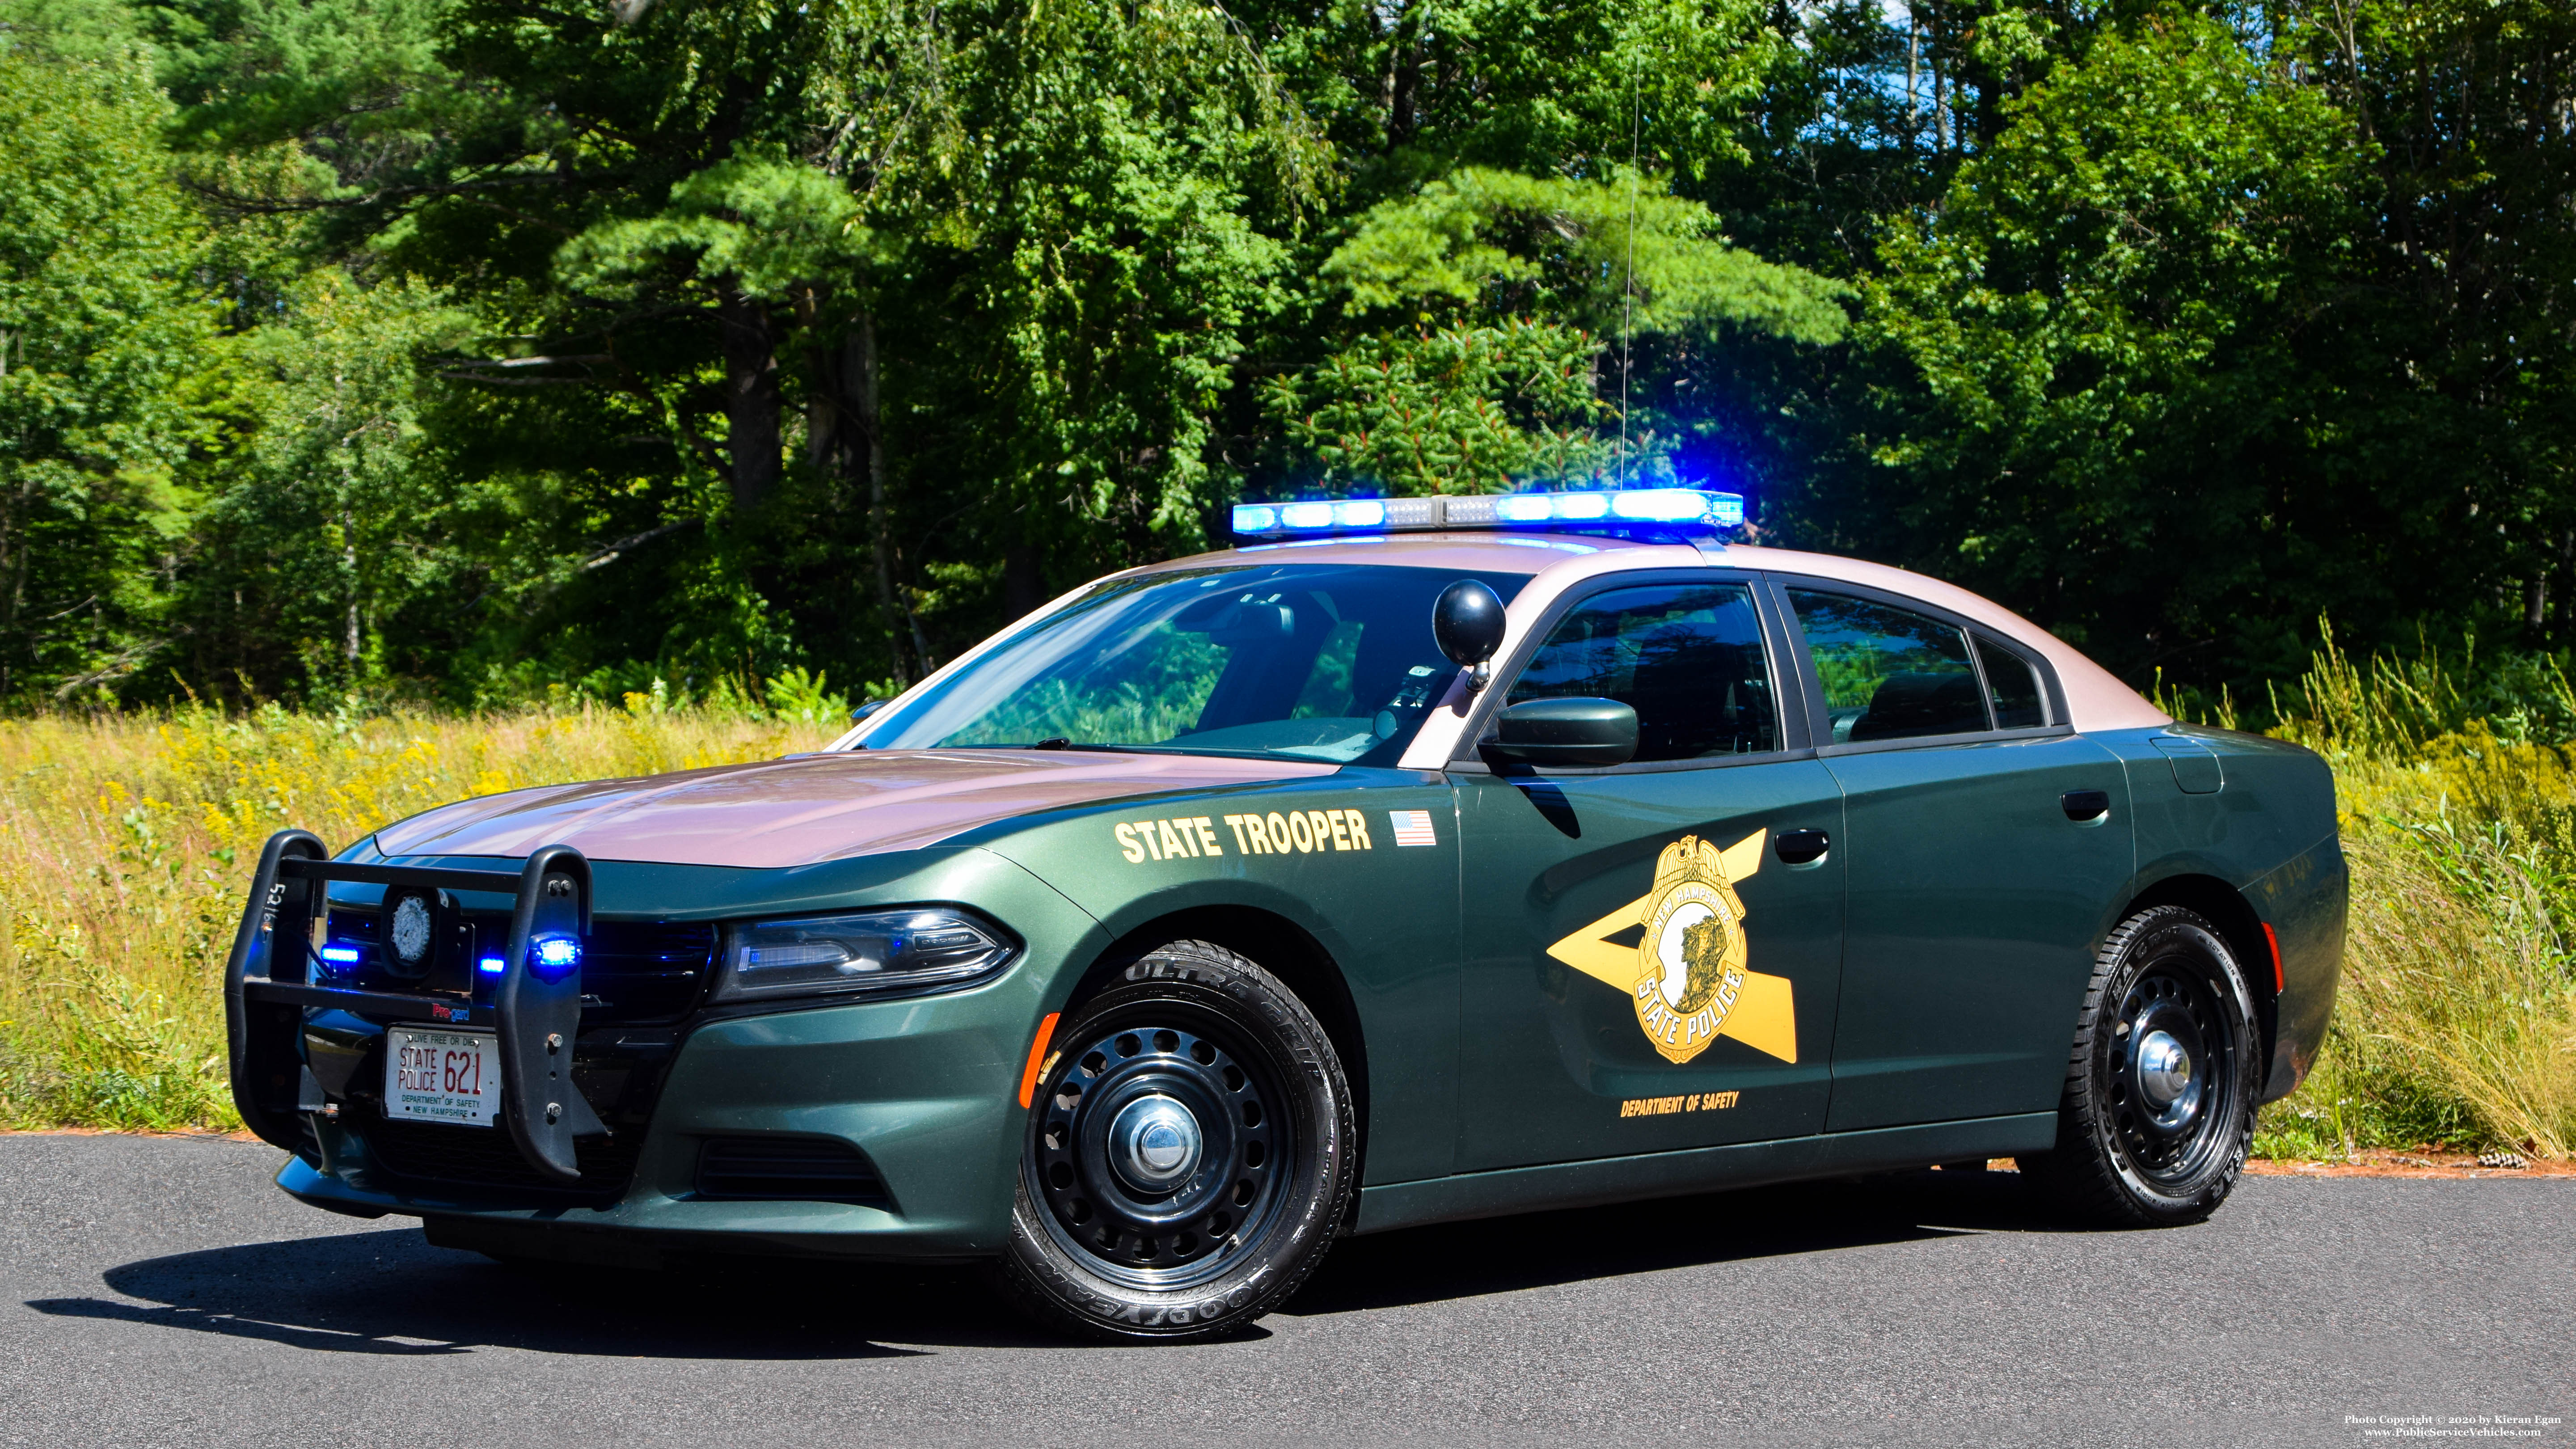 A photo  of New Hampshire State Police
            Cruiser 621, a 2016 Dodge Charger             taken by Kieran Egan